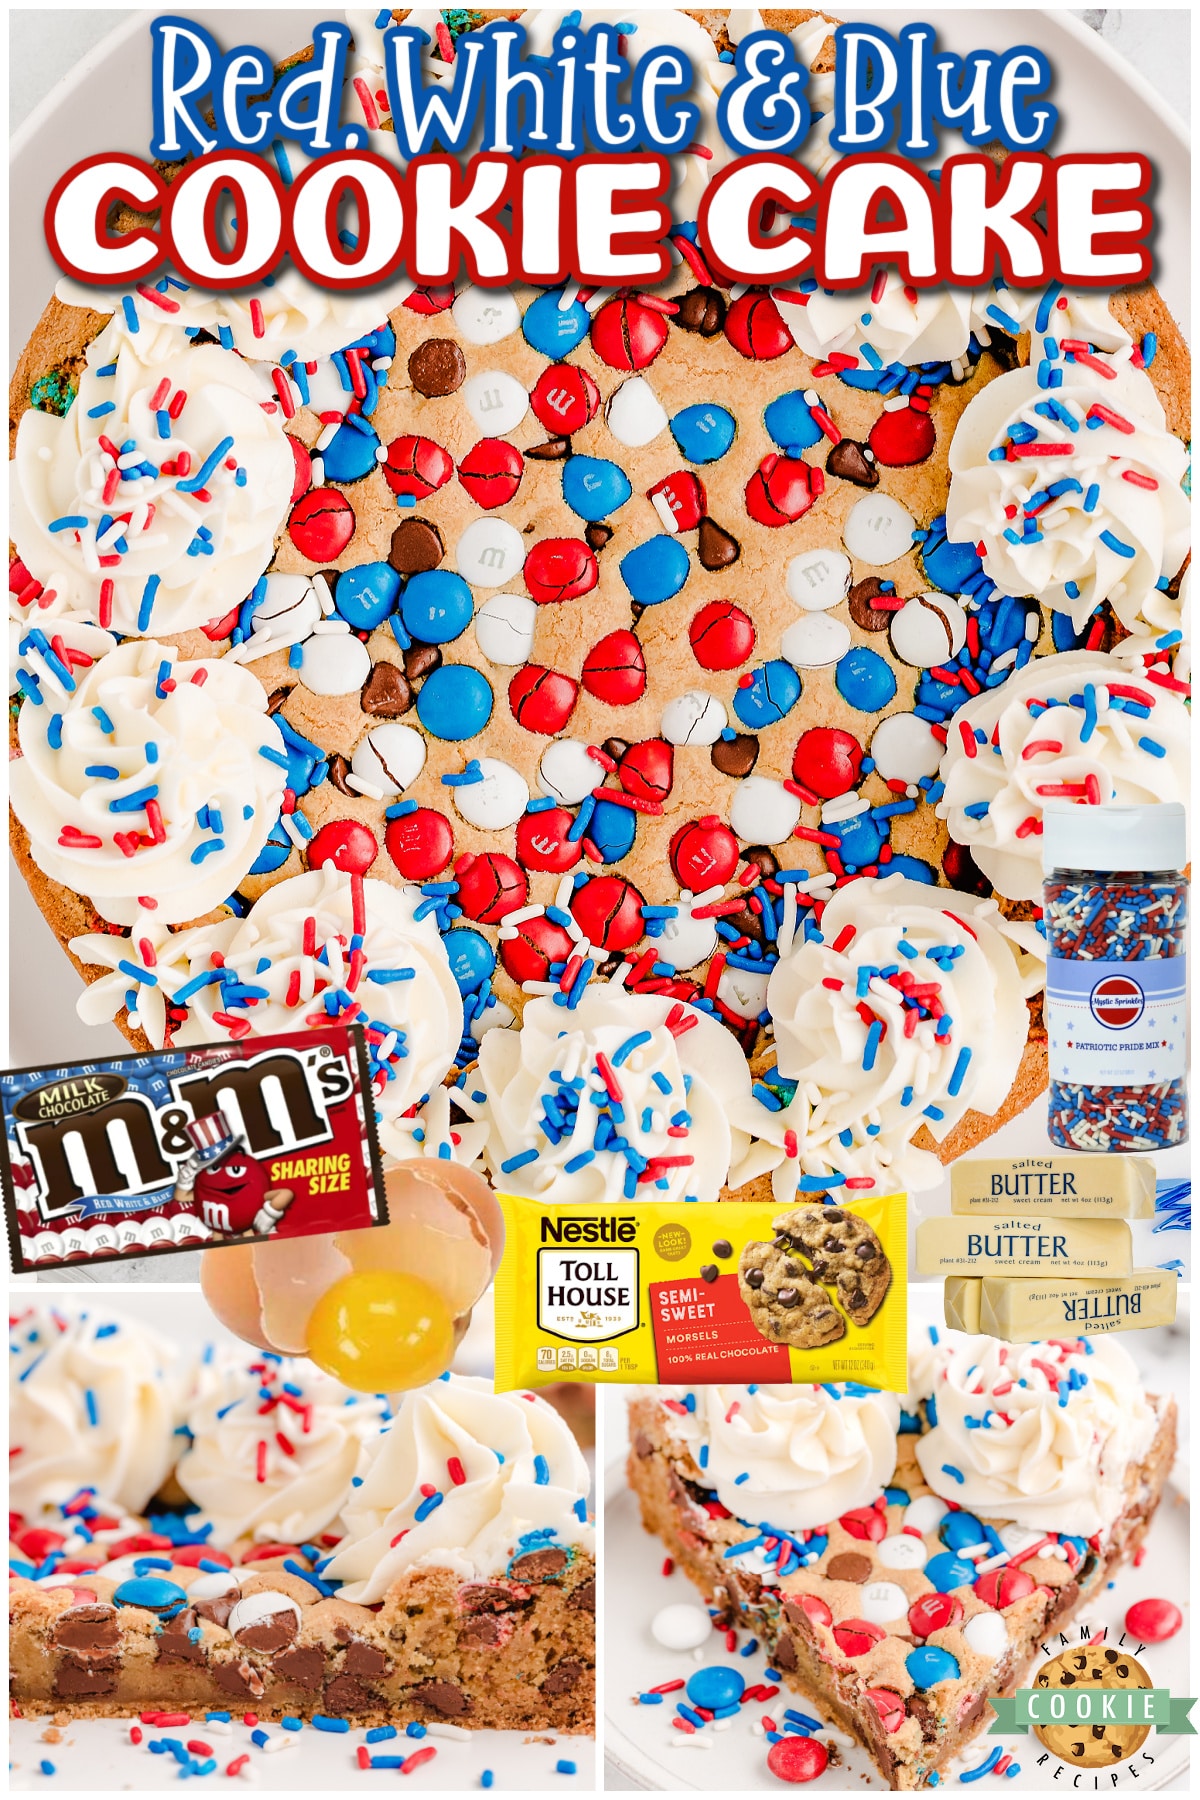 Fun, festive red, white & blue Patriotic Cookie Cake perfect for the 4th of July! Perfectly sweet, chewy M&M cookie dough baked & topped with buttercream frosting & sprinkles everyone loves! 